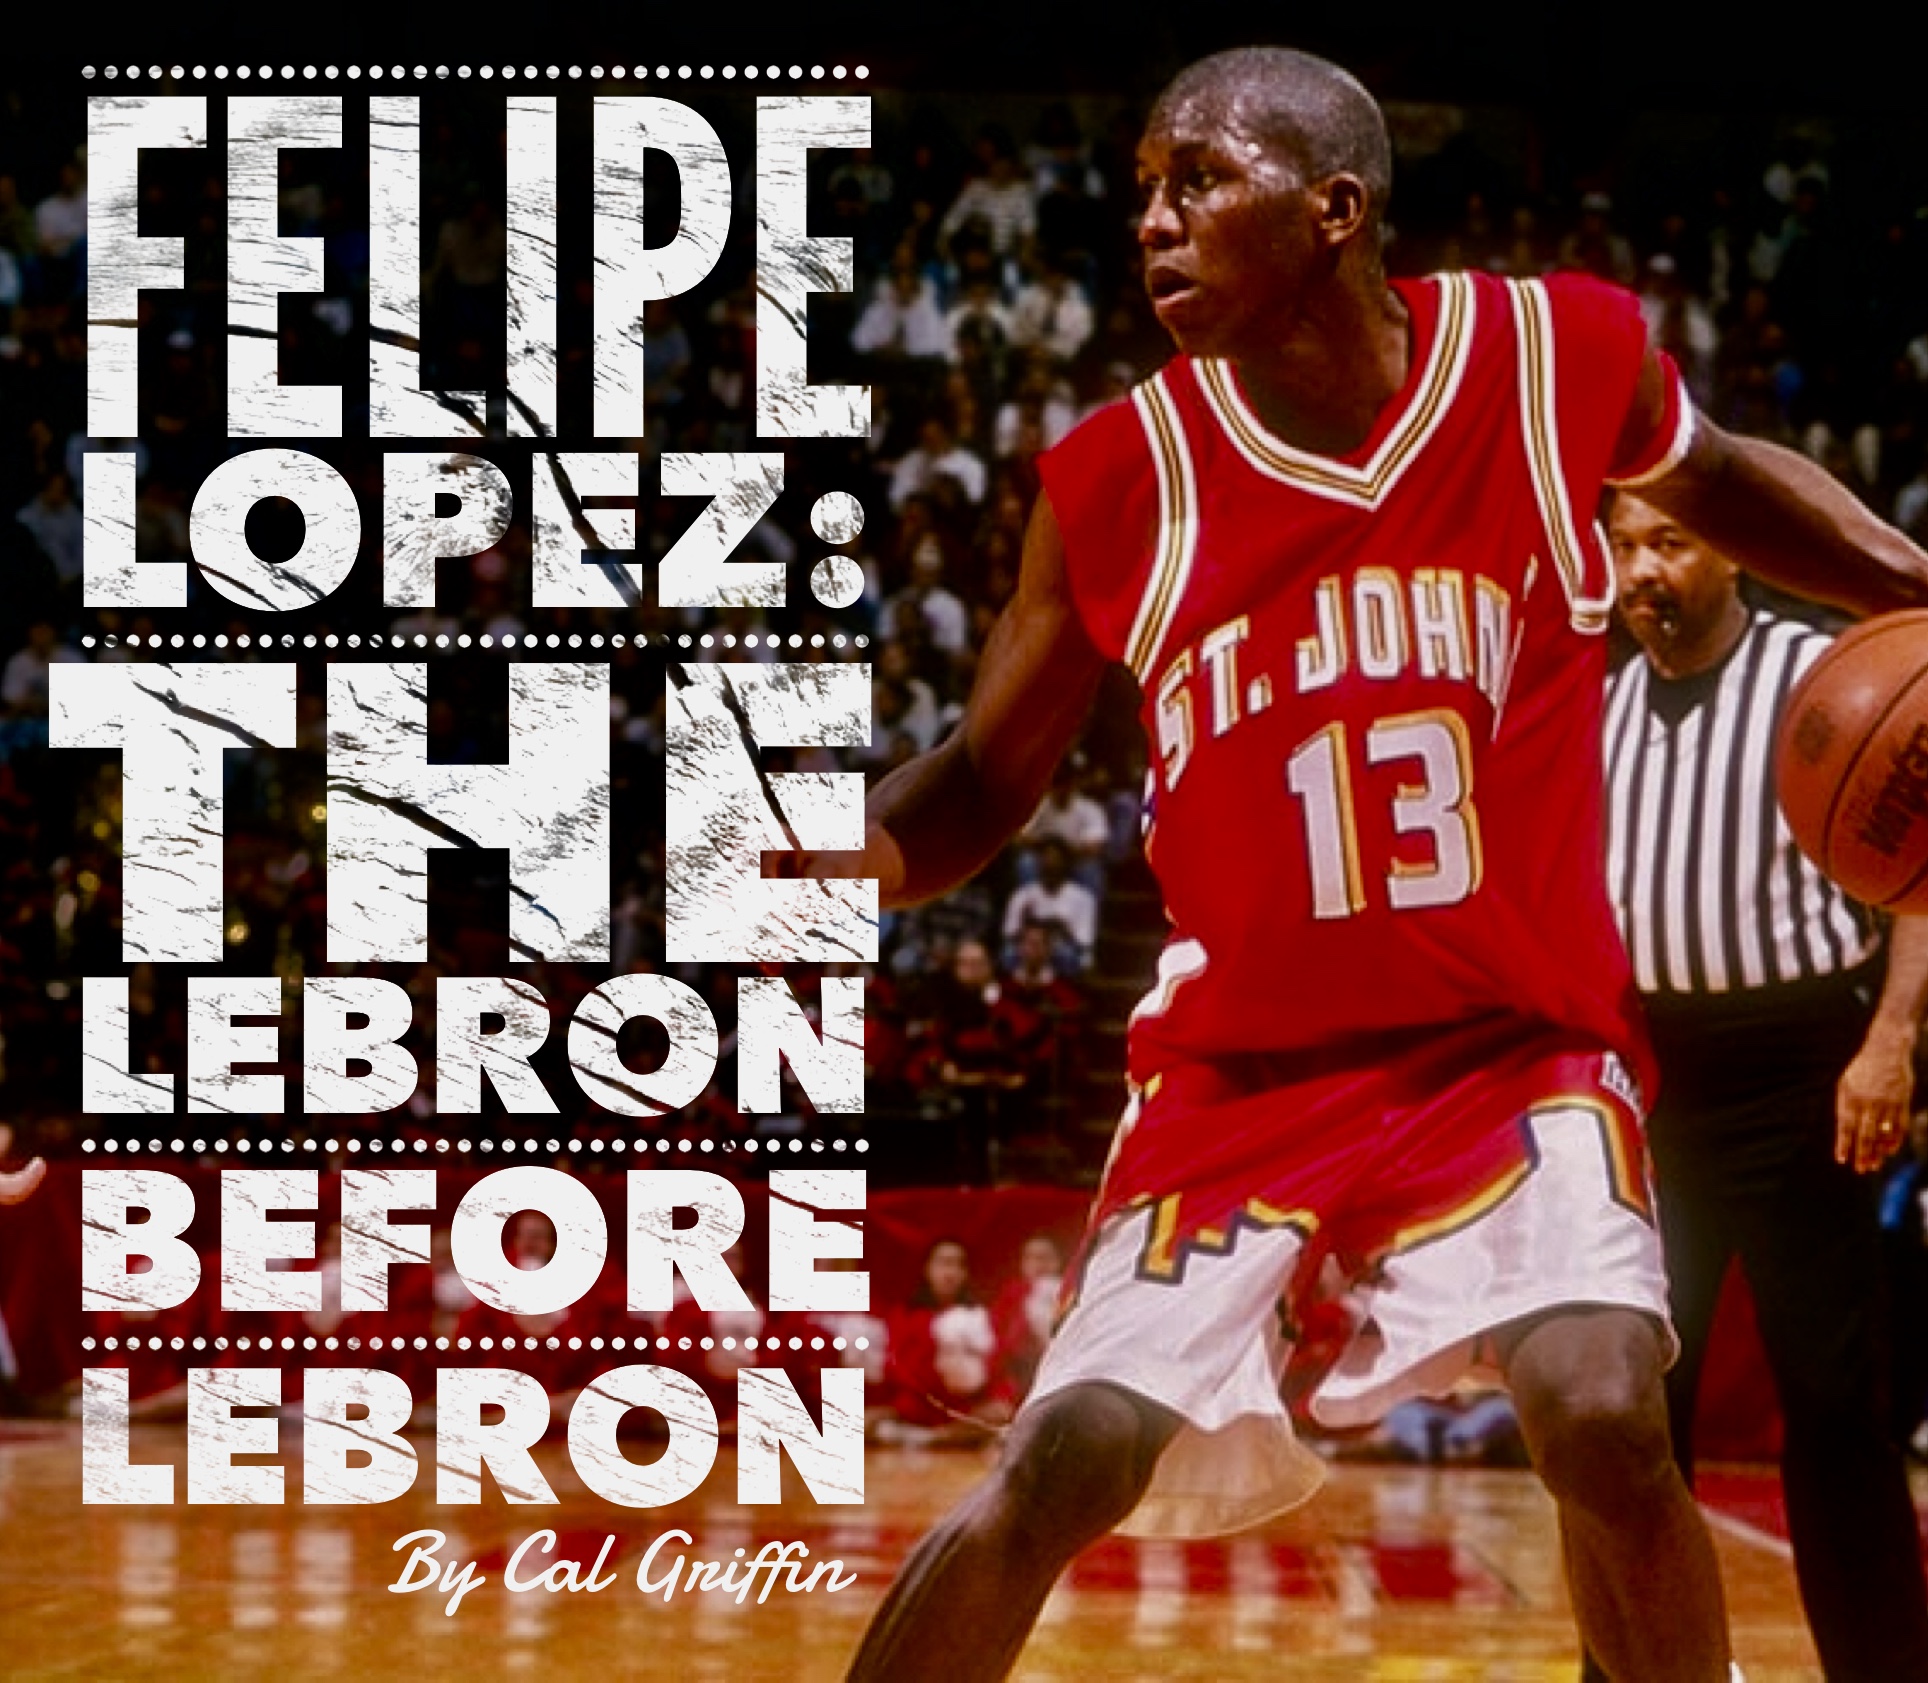 Basketball player Felipe Lopez is photographed for Sports